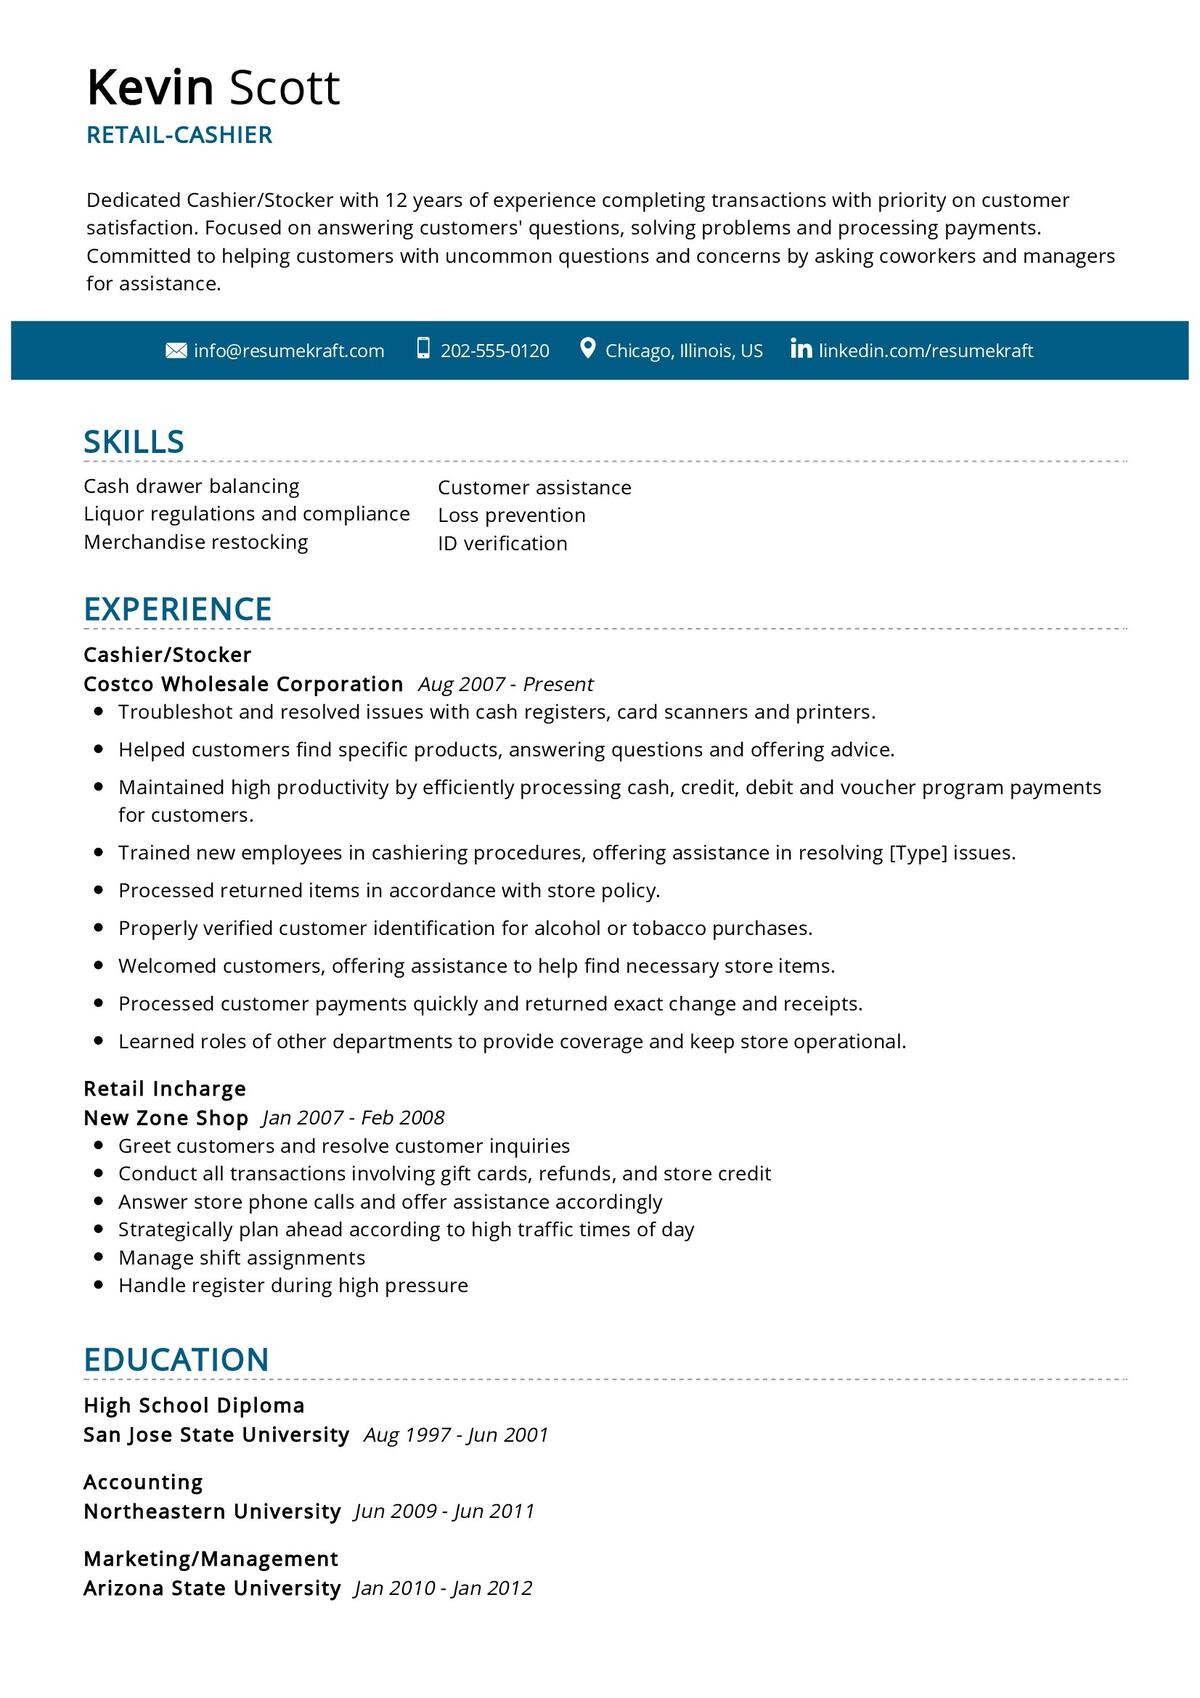 Professional Summary Resume Sample for Cashier Cashier Resume Example 2021 Writing Guide & Tips – Resumekraft